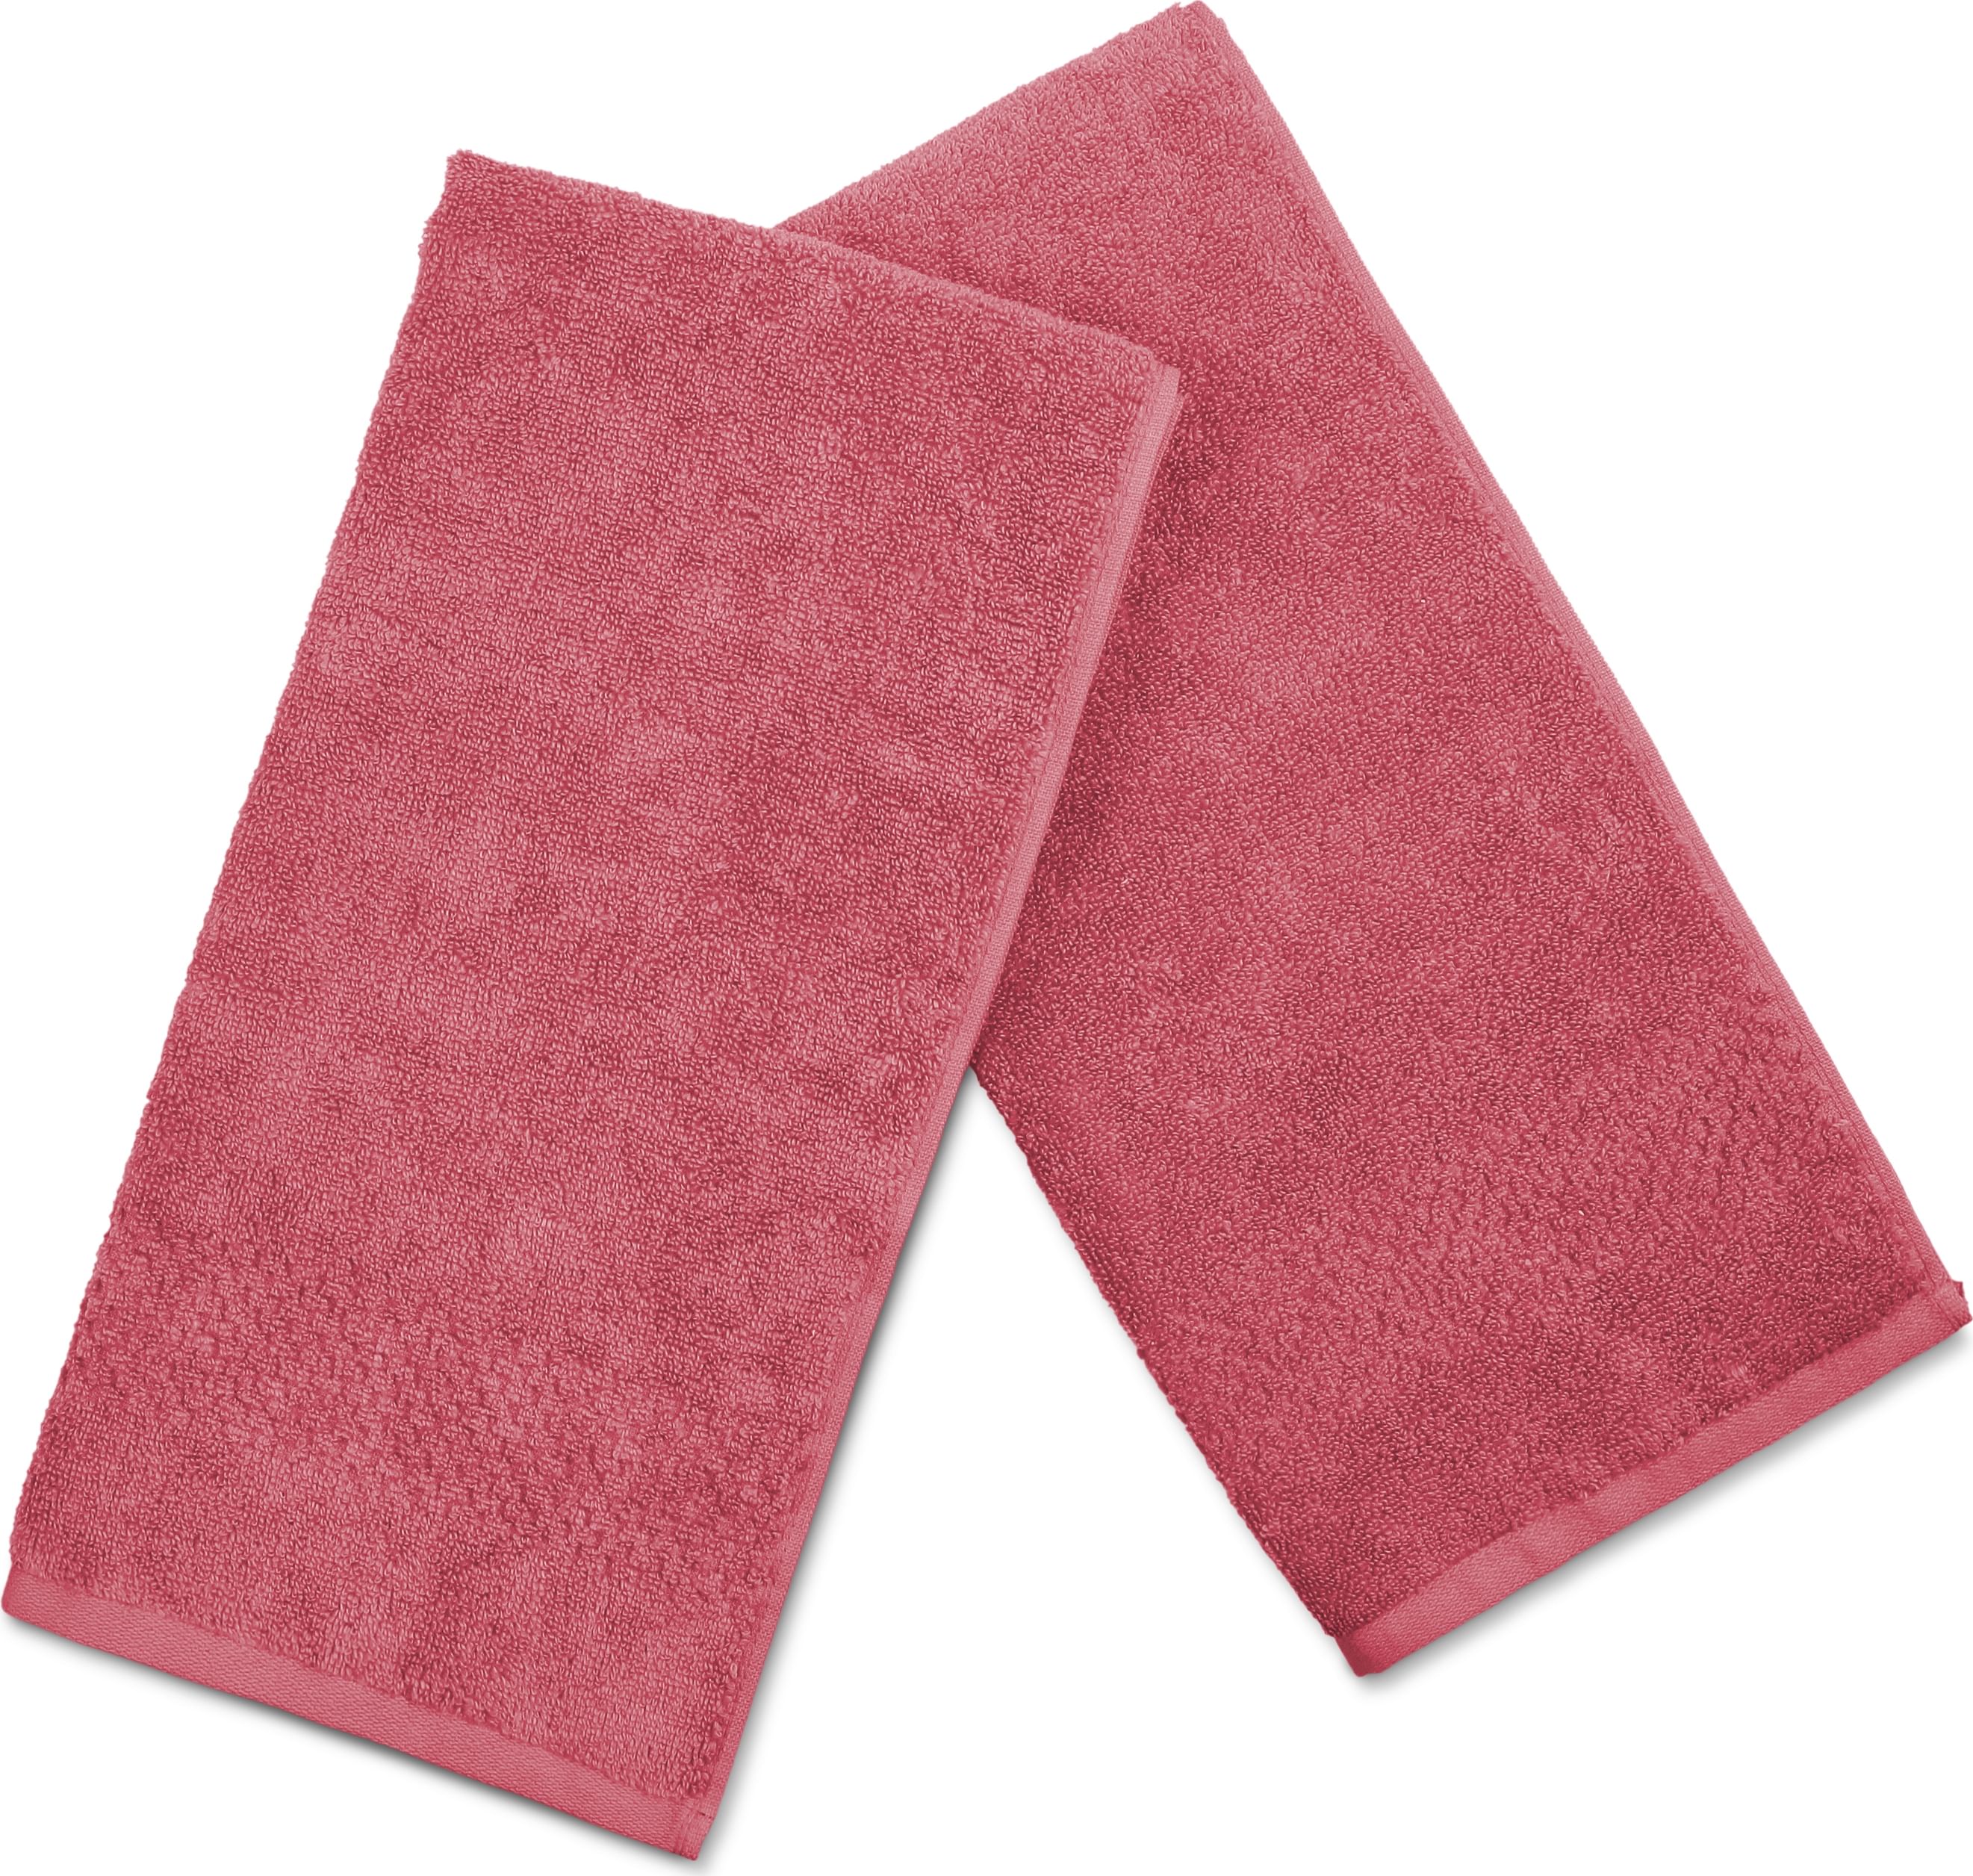 Swift Dry Cotton Hand Towel 40X60 Cm 450 Gsm in Red Colour